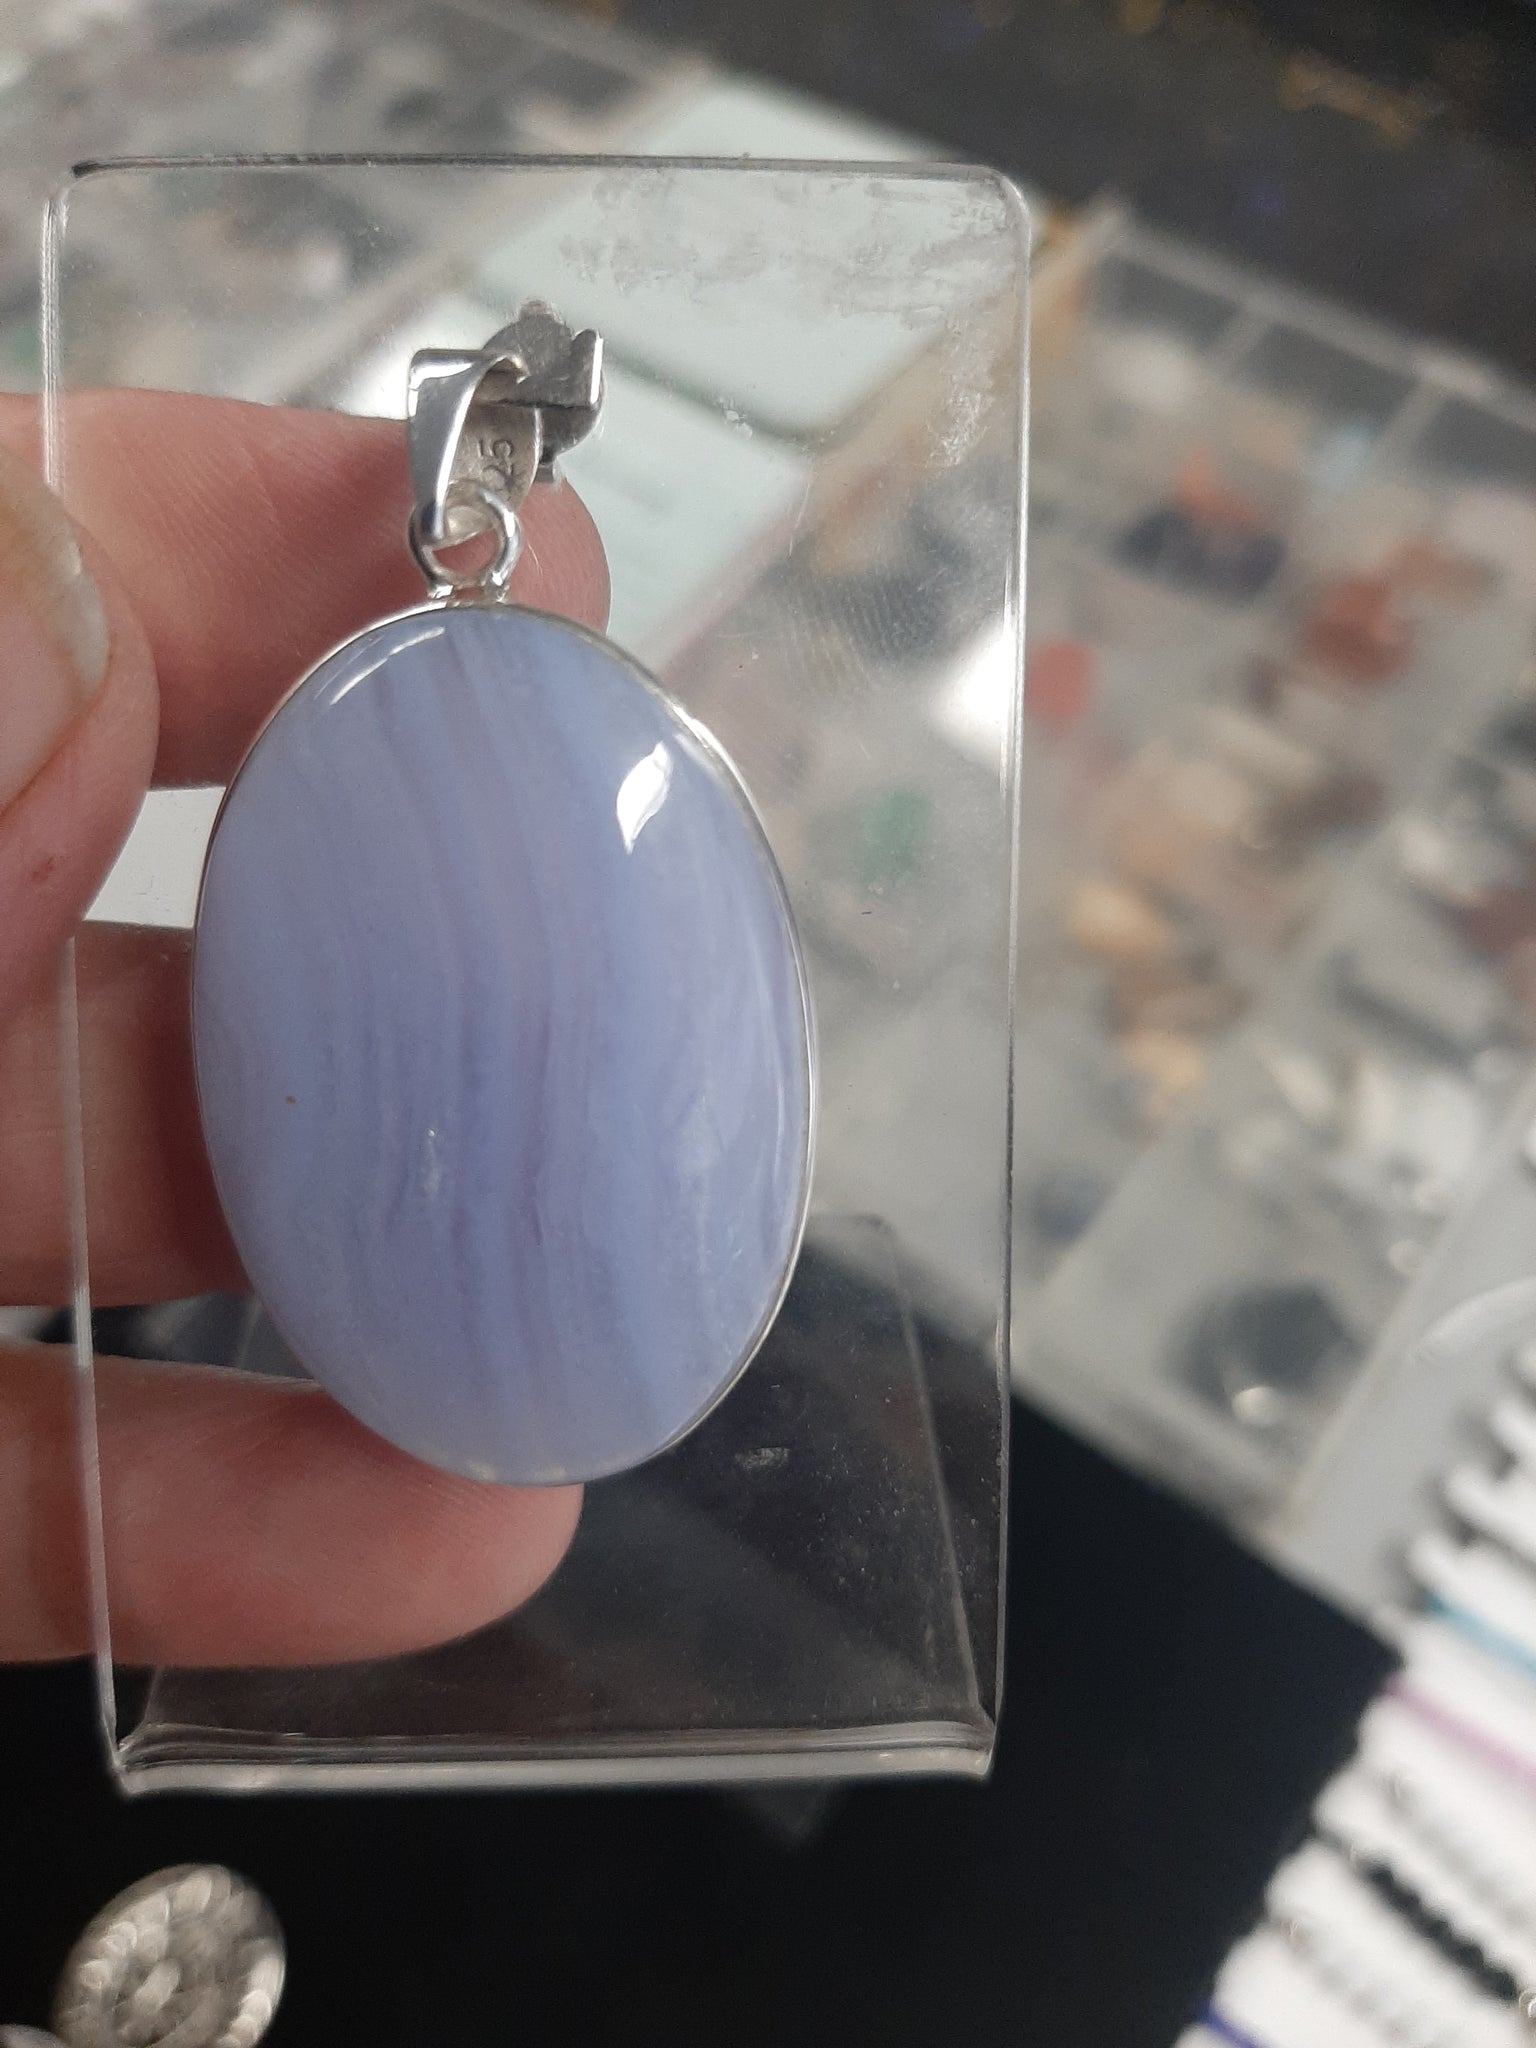 Blue Lace Agate Jewellery